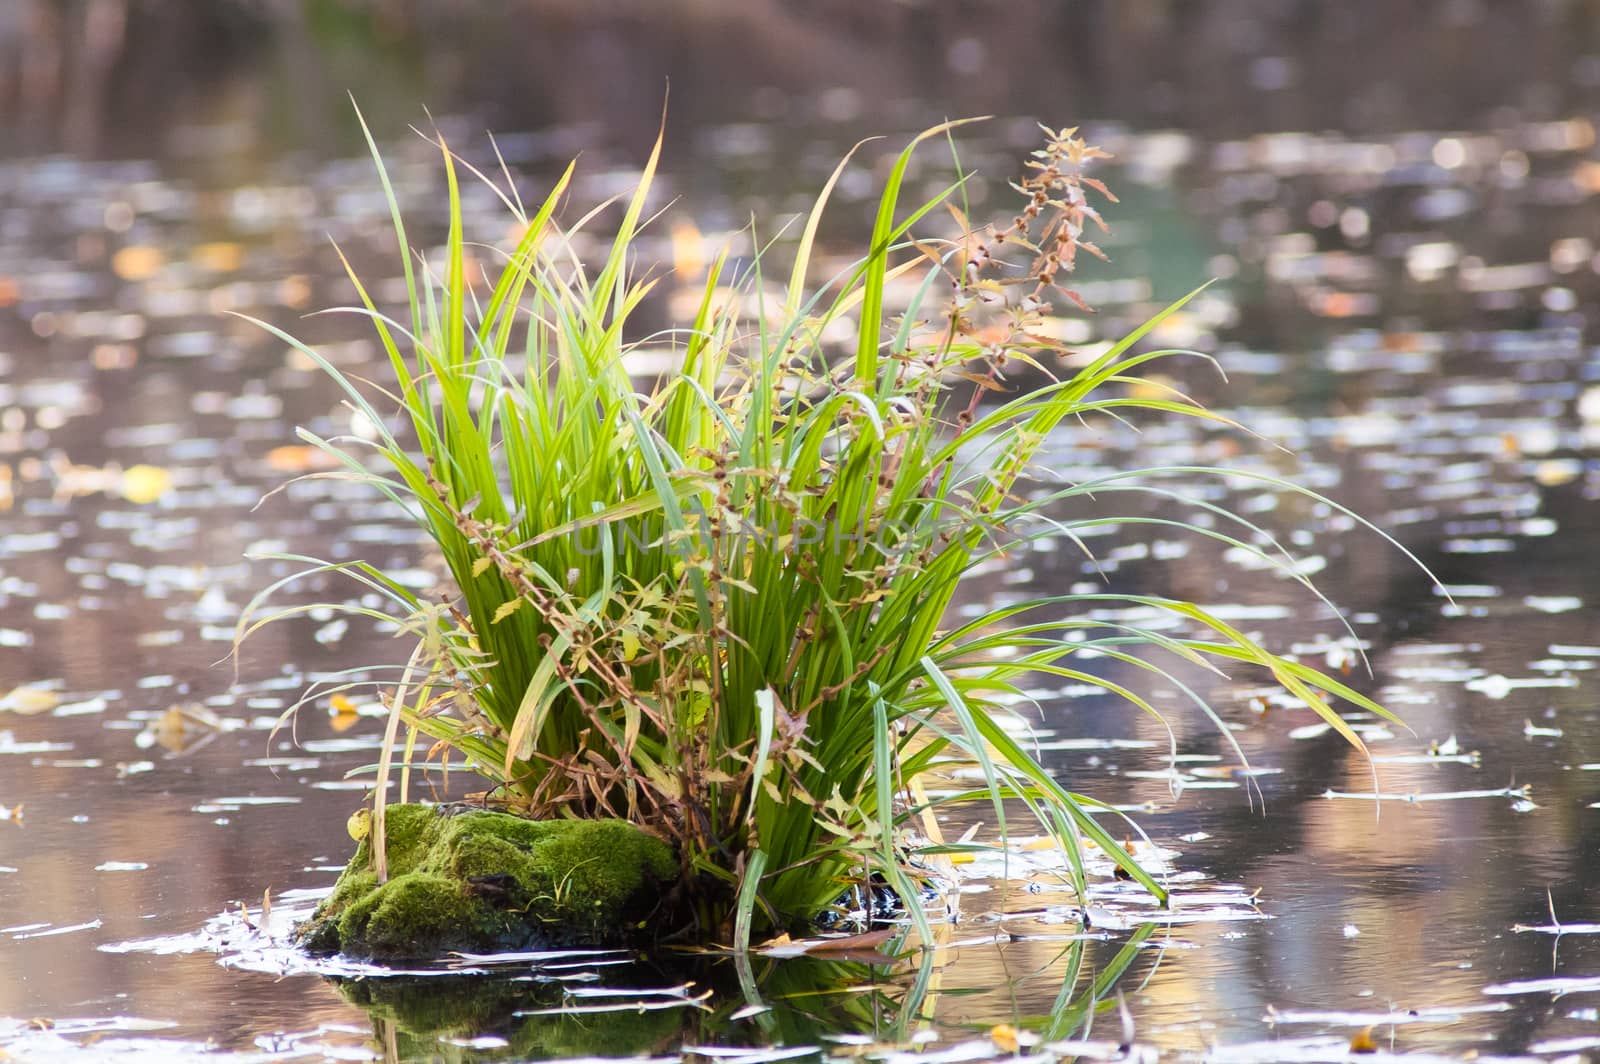 sprout from the stump in the water